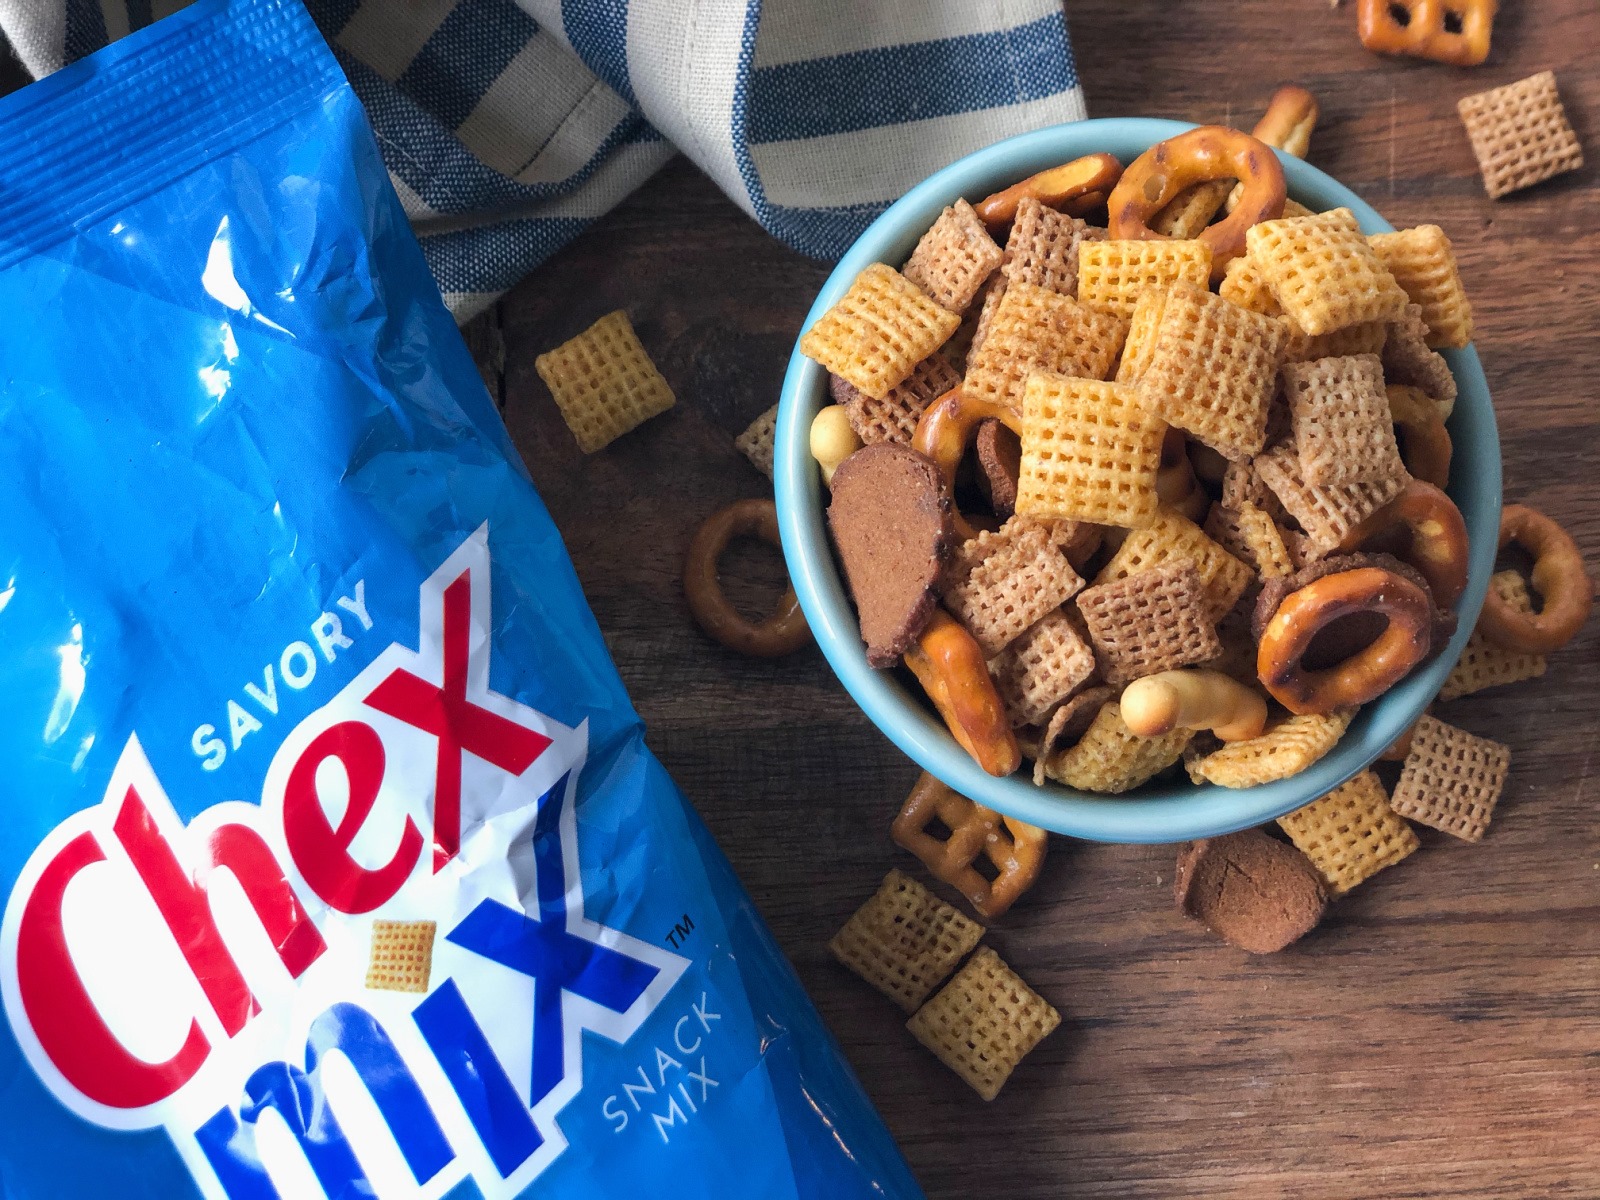 Bugles, Chex Mix Or Gardettos Snacks As Low As $1.24 At Kroger